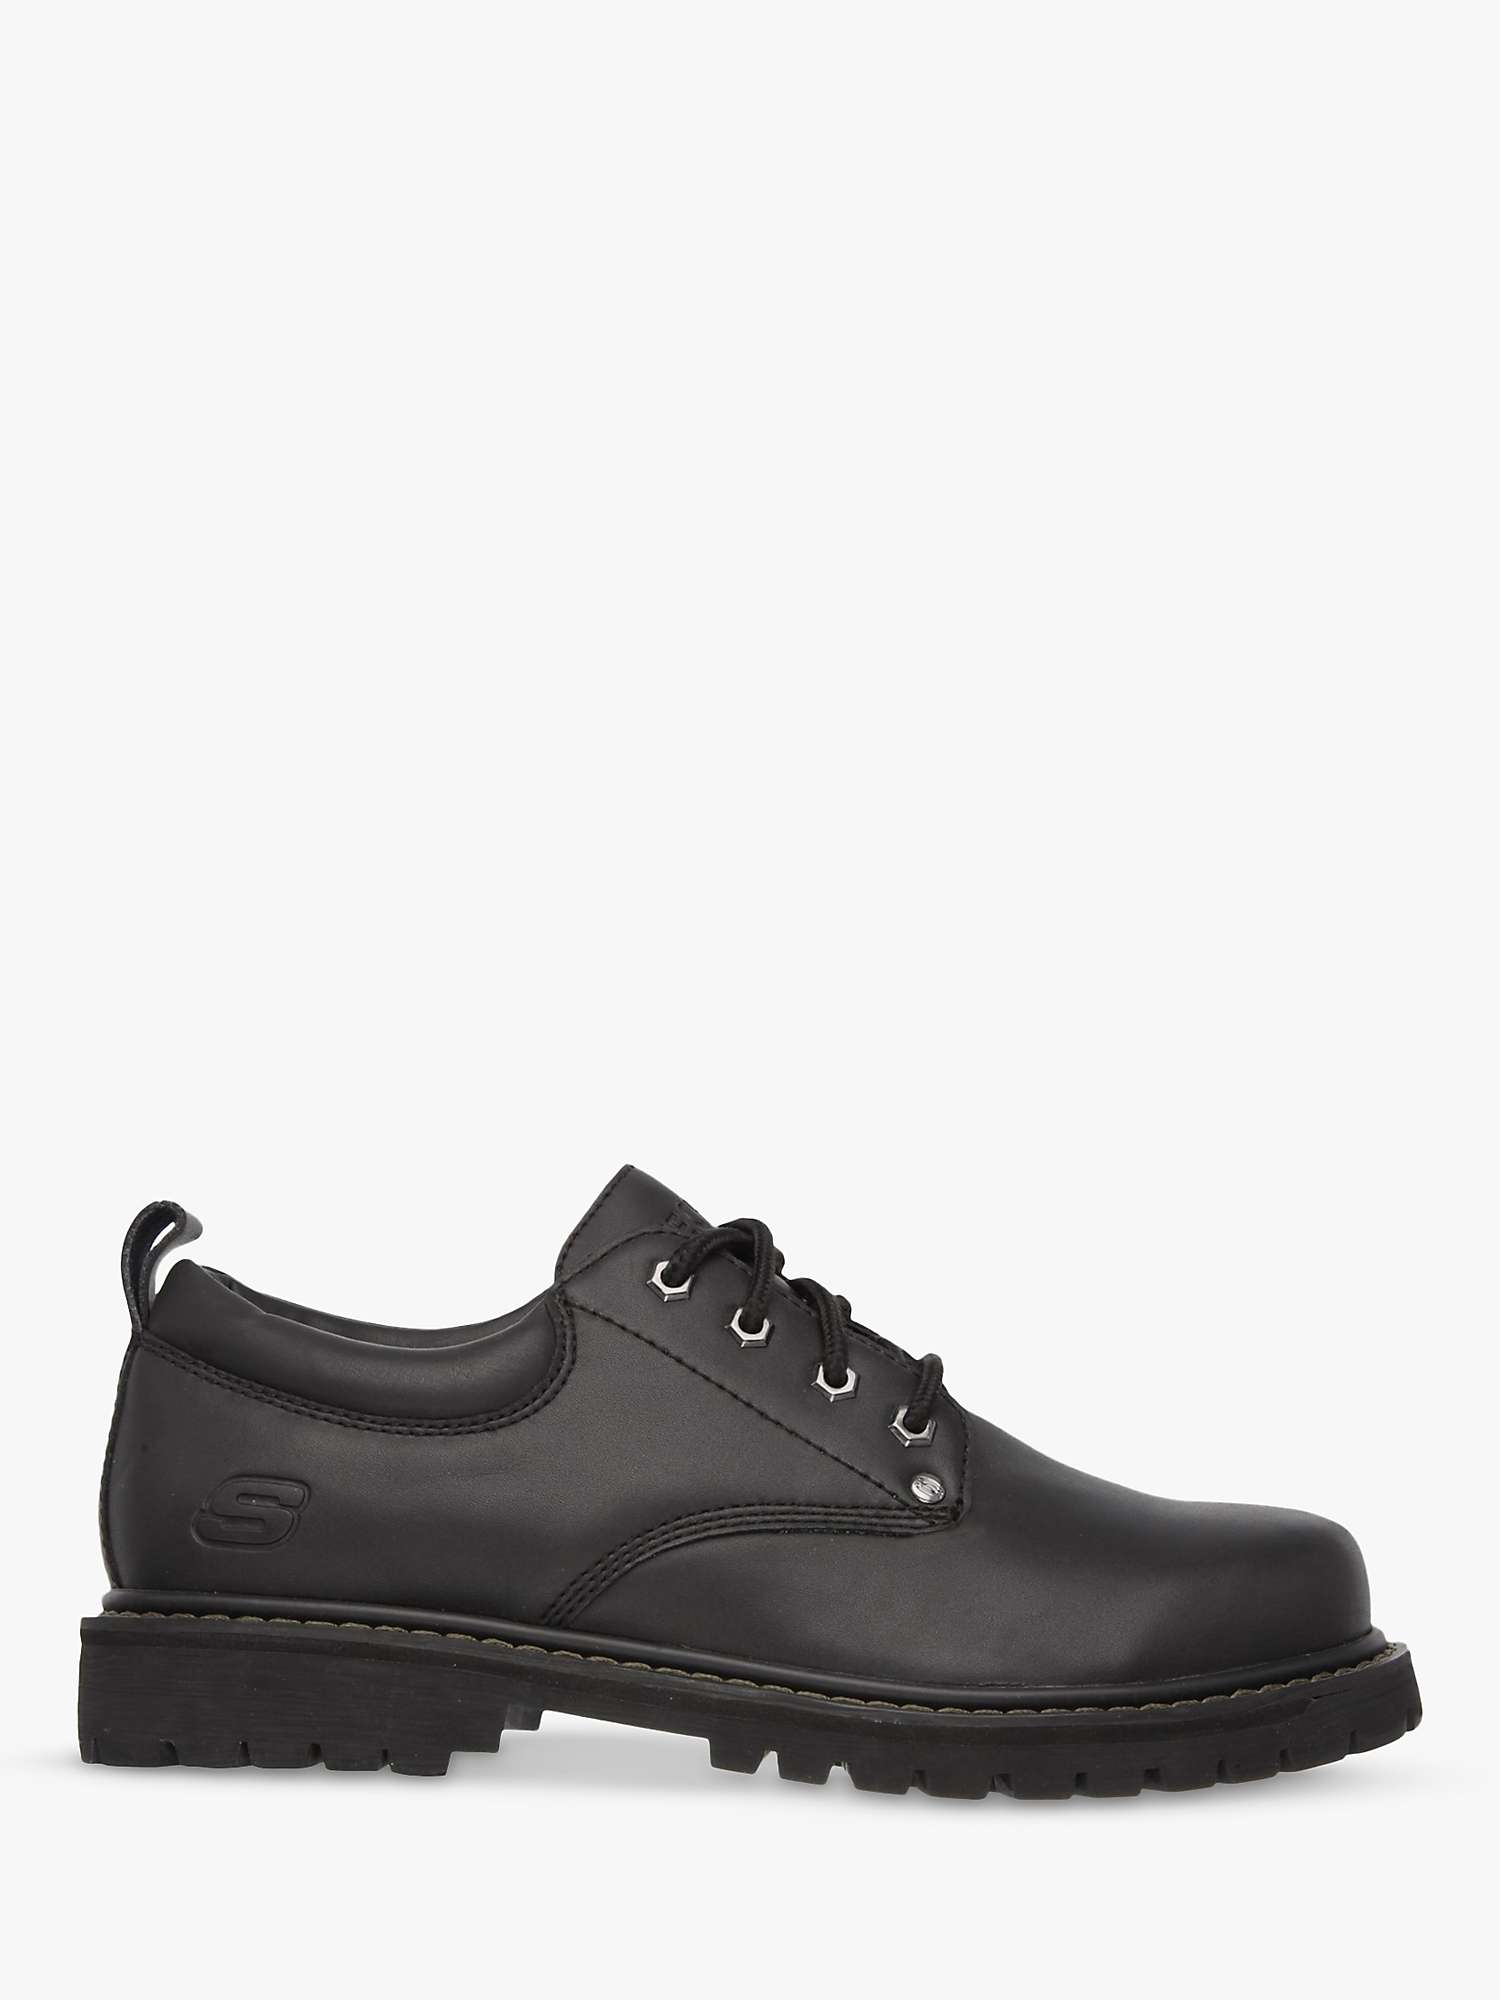 Buy Skechers Tom Cats Leather Lace Up Oxford Shoes Online at johnlewis.com